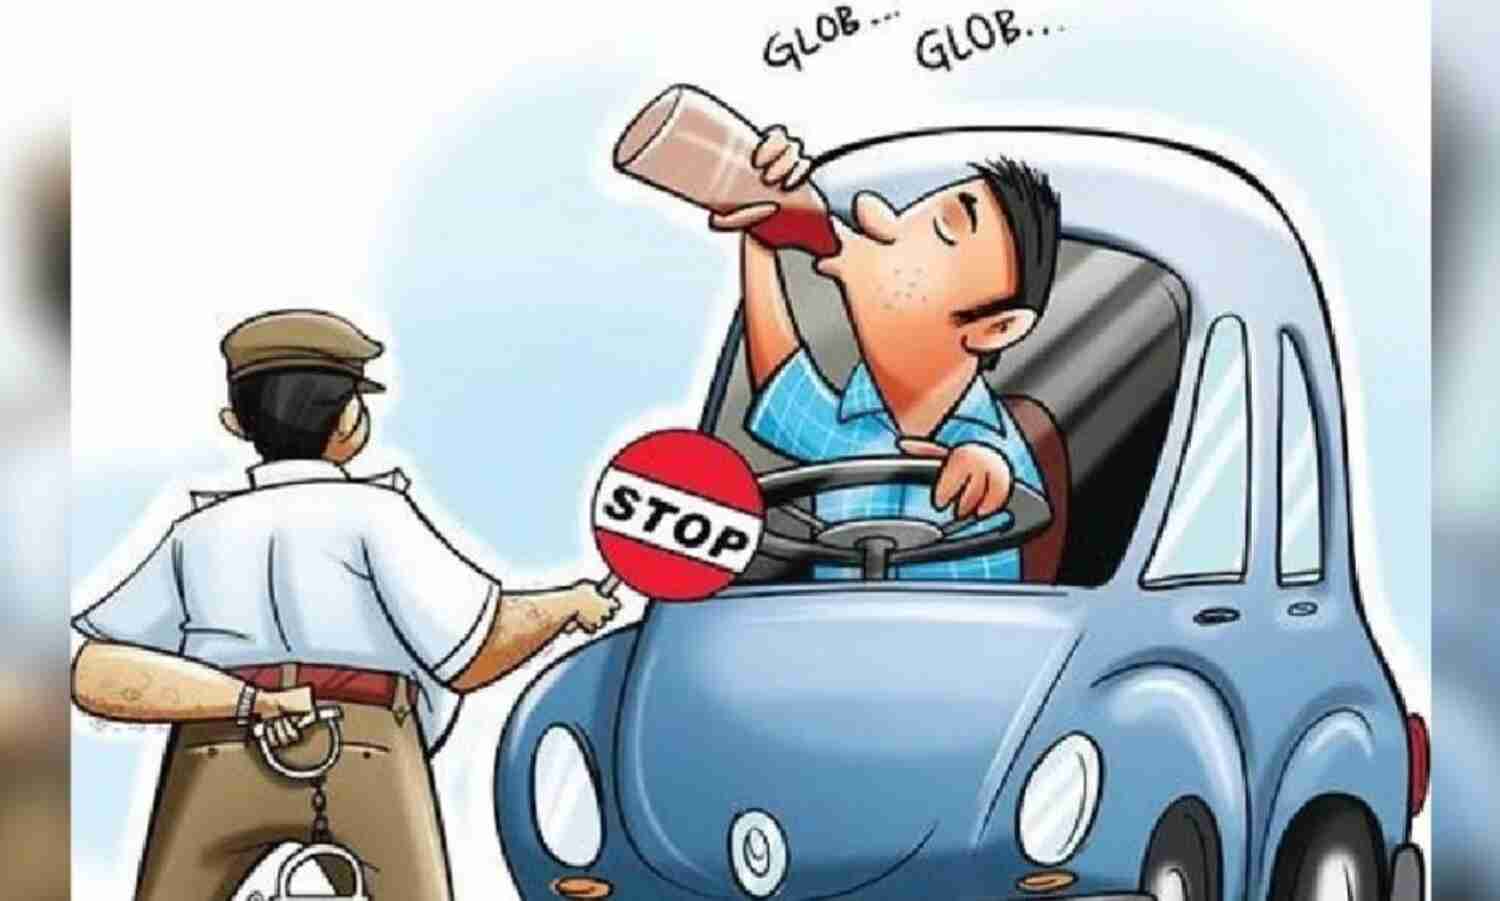 Drunk driving: Rs 7.54 cr fine collected in Chennai in over 2 months